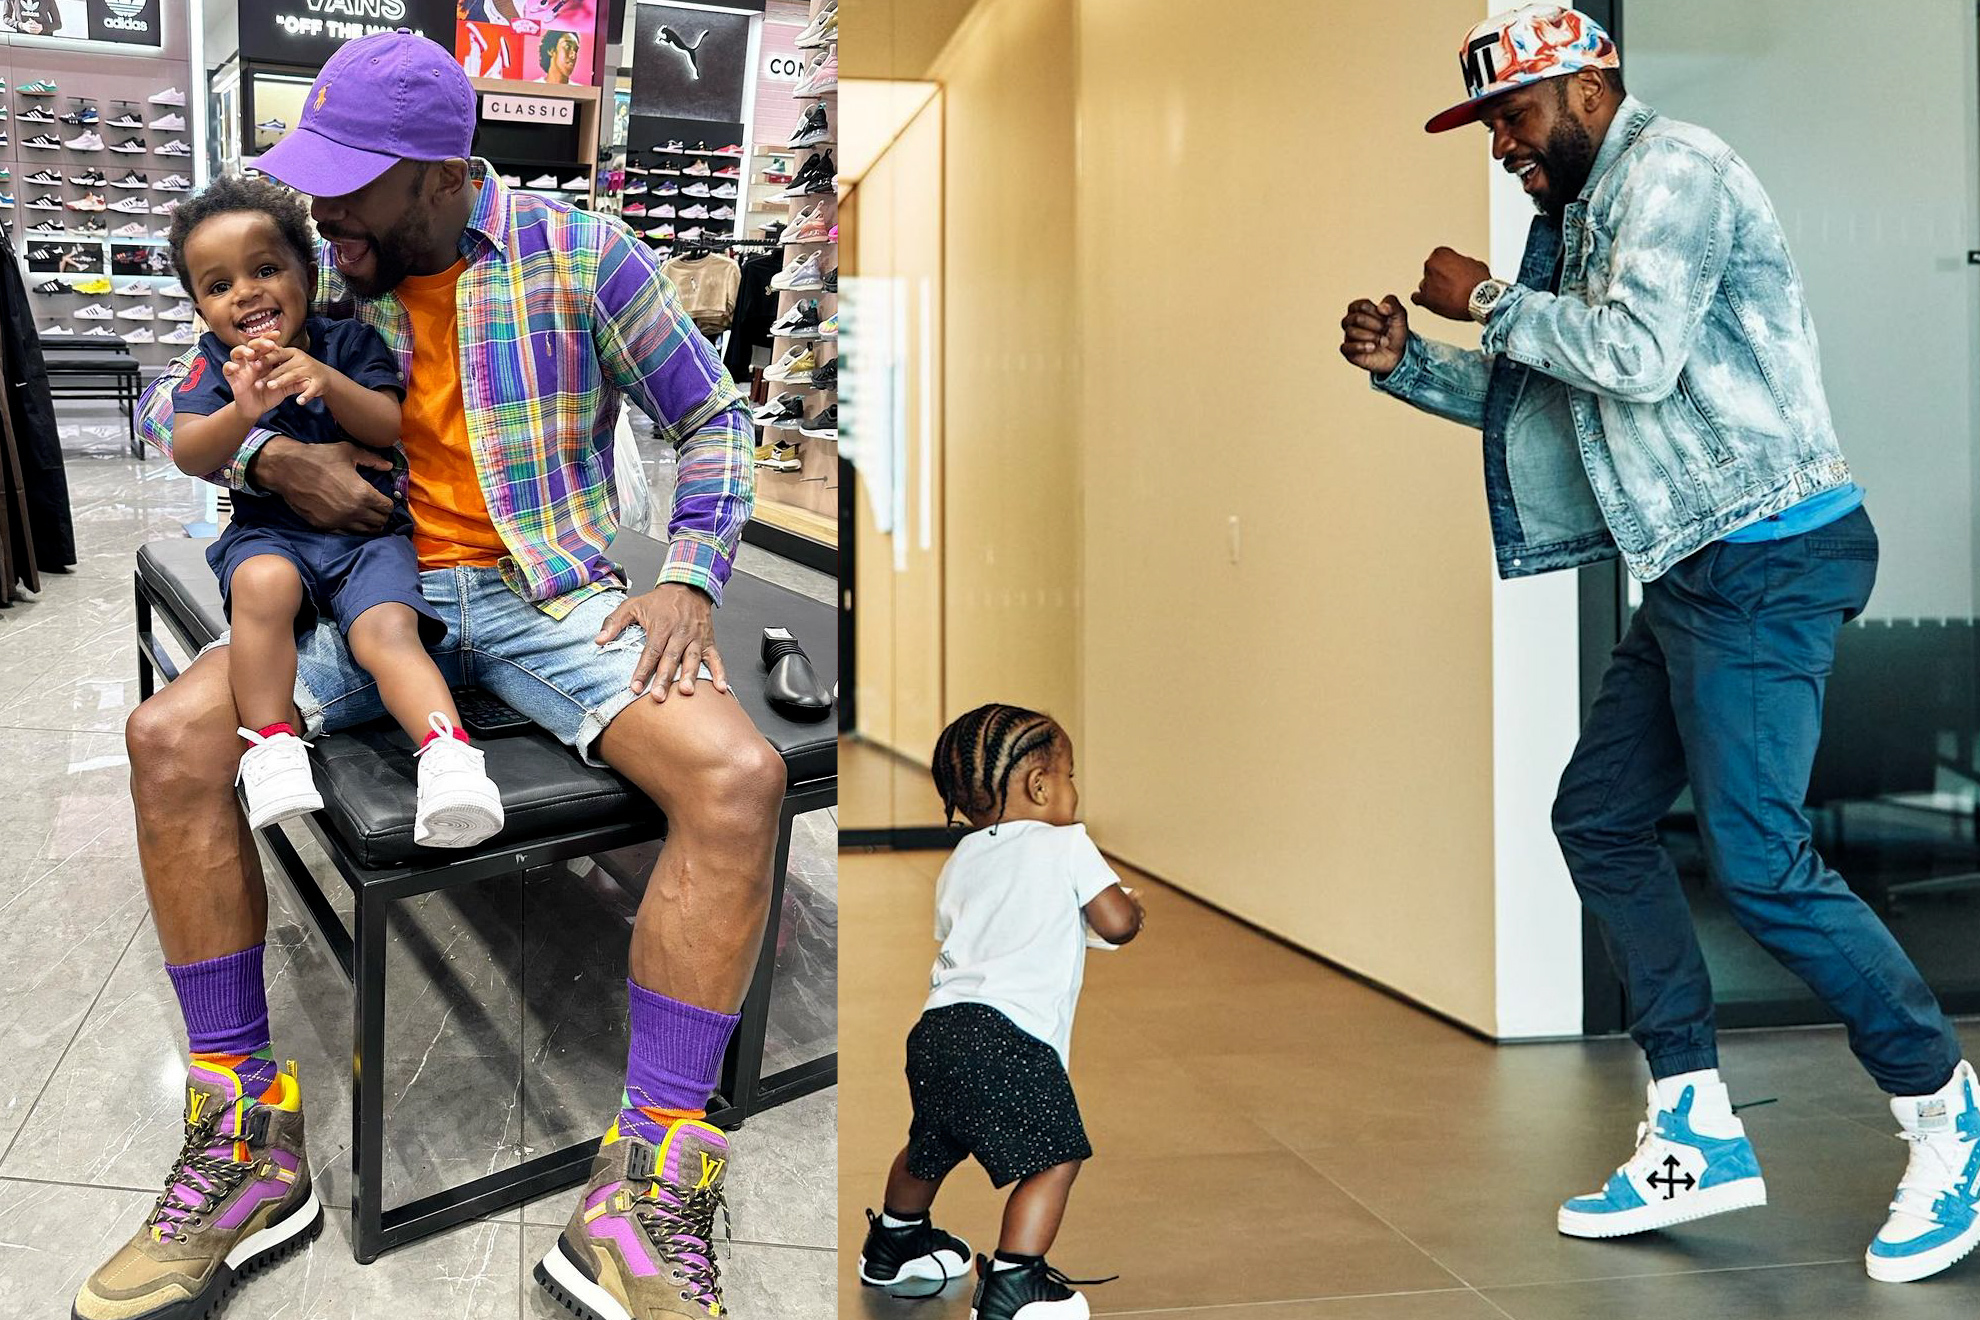 Floyd Mayweather and his grandson Meezy Mayweather